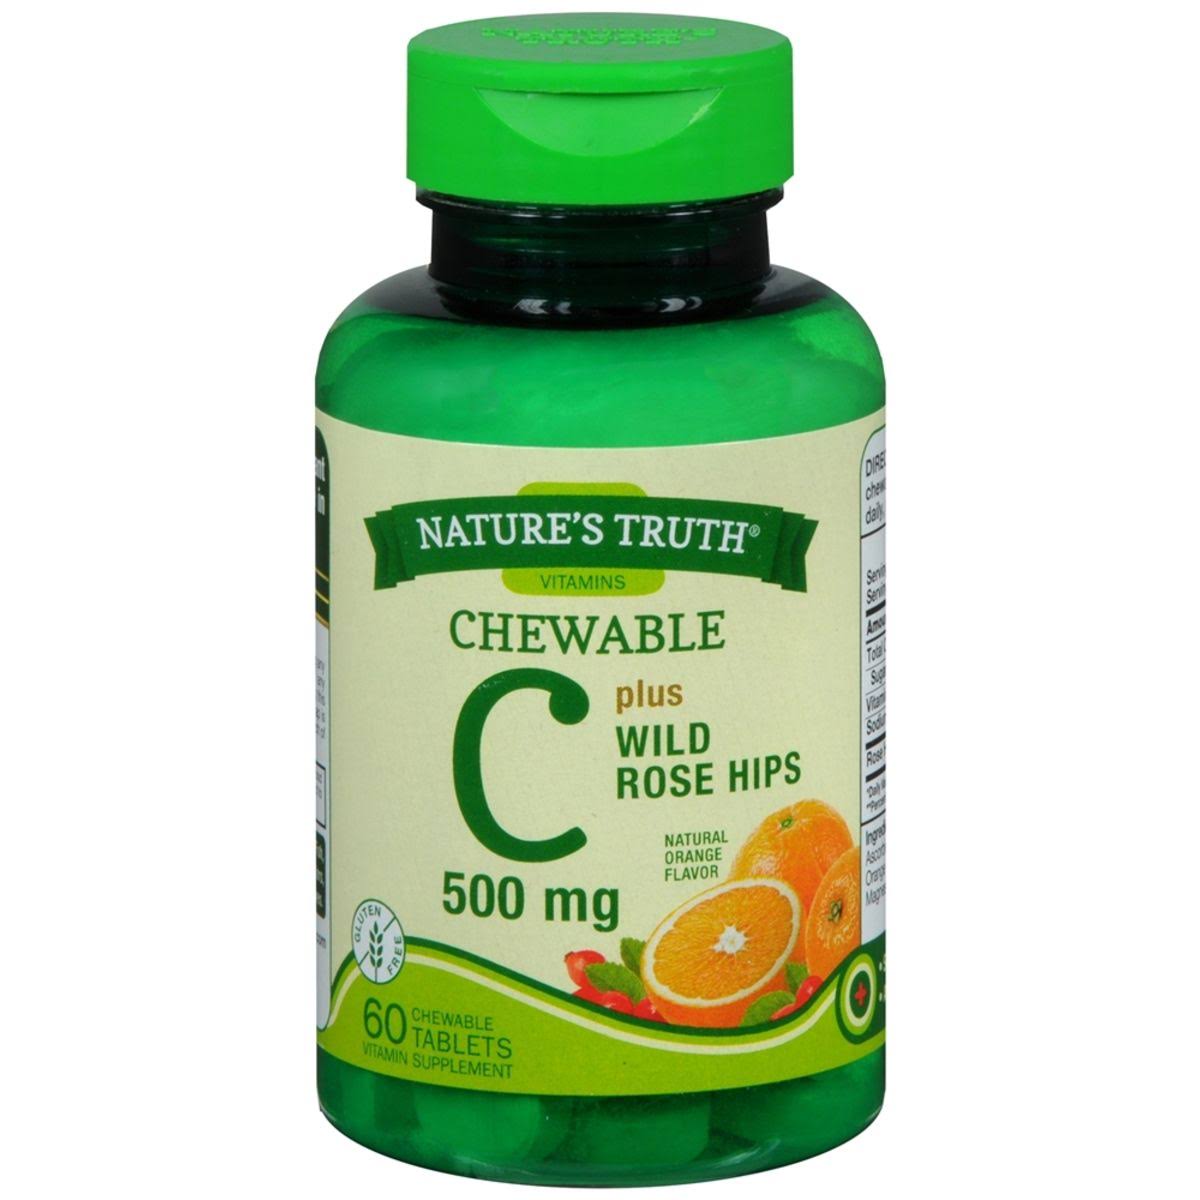 Nature's Truth Chewable C Plus Rose Hips Supplement - 60 Chewable Tablets